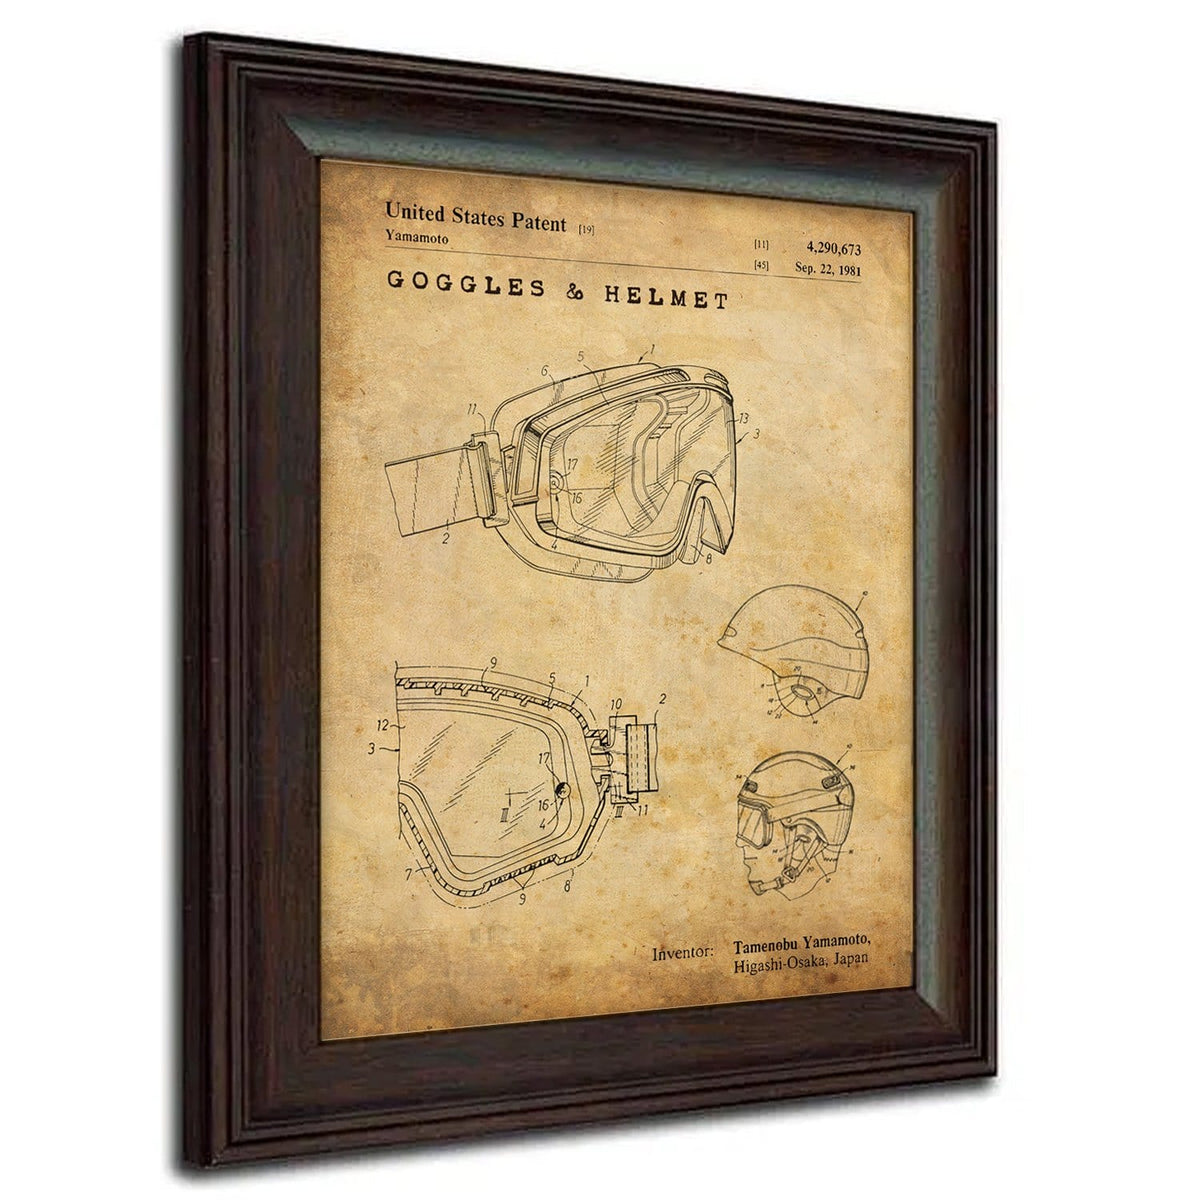 1981 US Patent drawing of ski goggles and helmet from Personal Prints